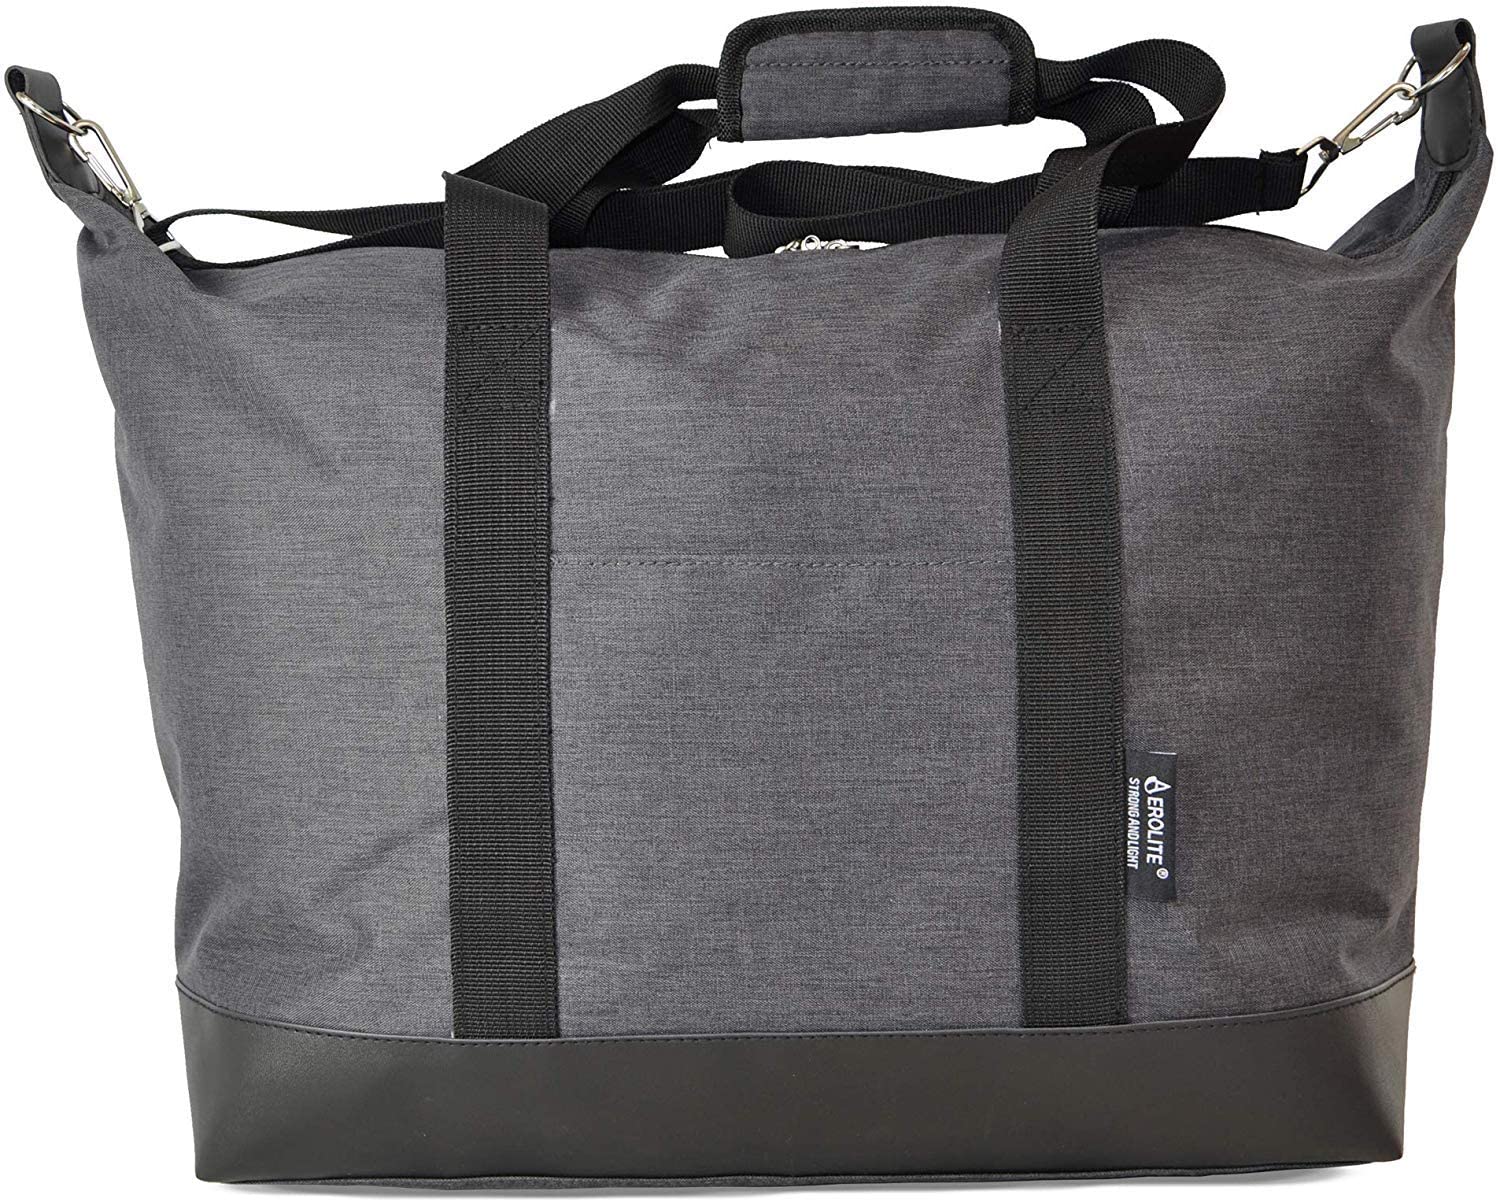 Lightweight Holdall Hand Cabin Luggage Bag in Black Featured Image